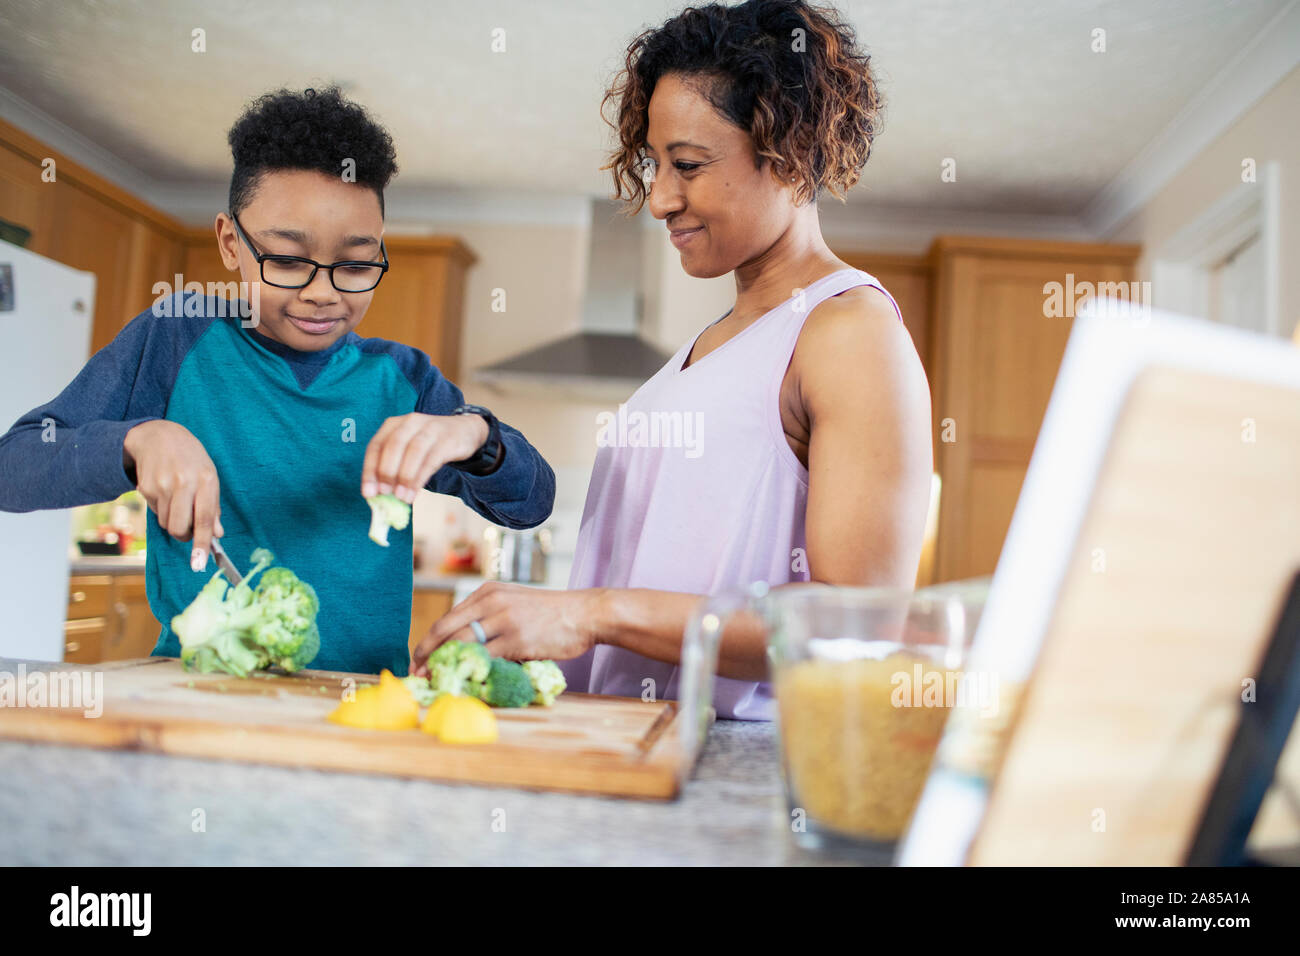 Mother and son cooking, cutting vegetables in kitchen Stock Photo